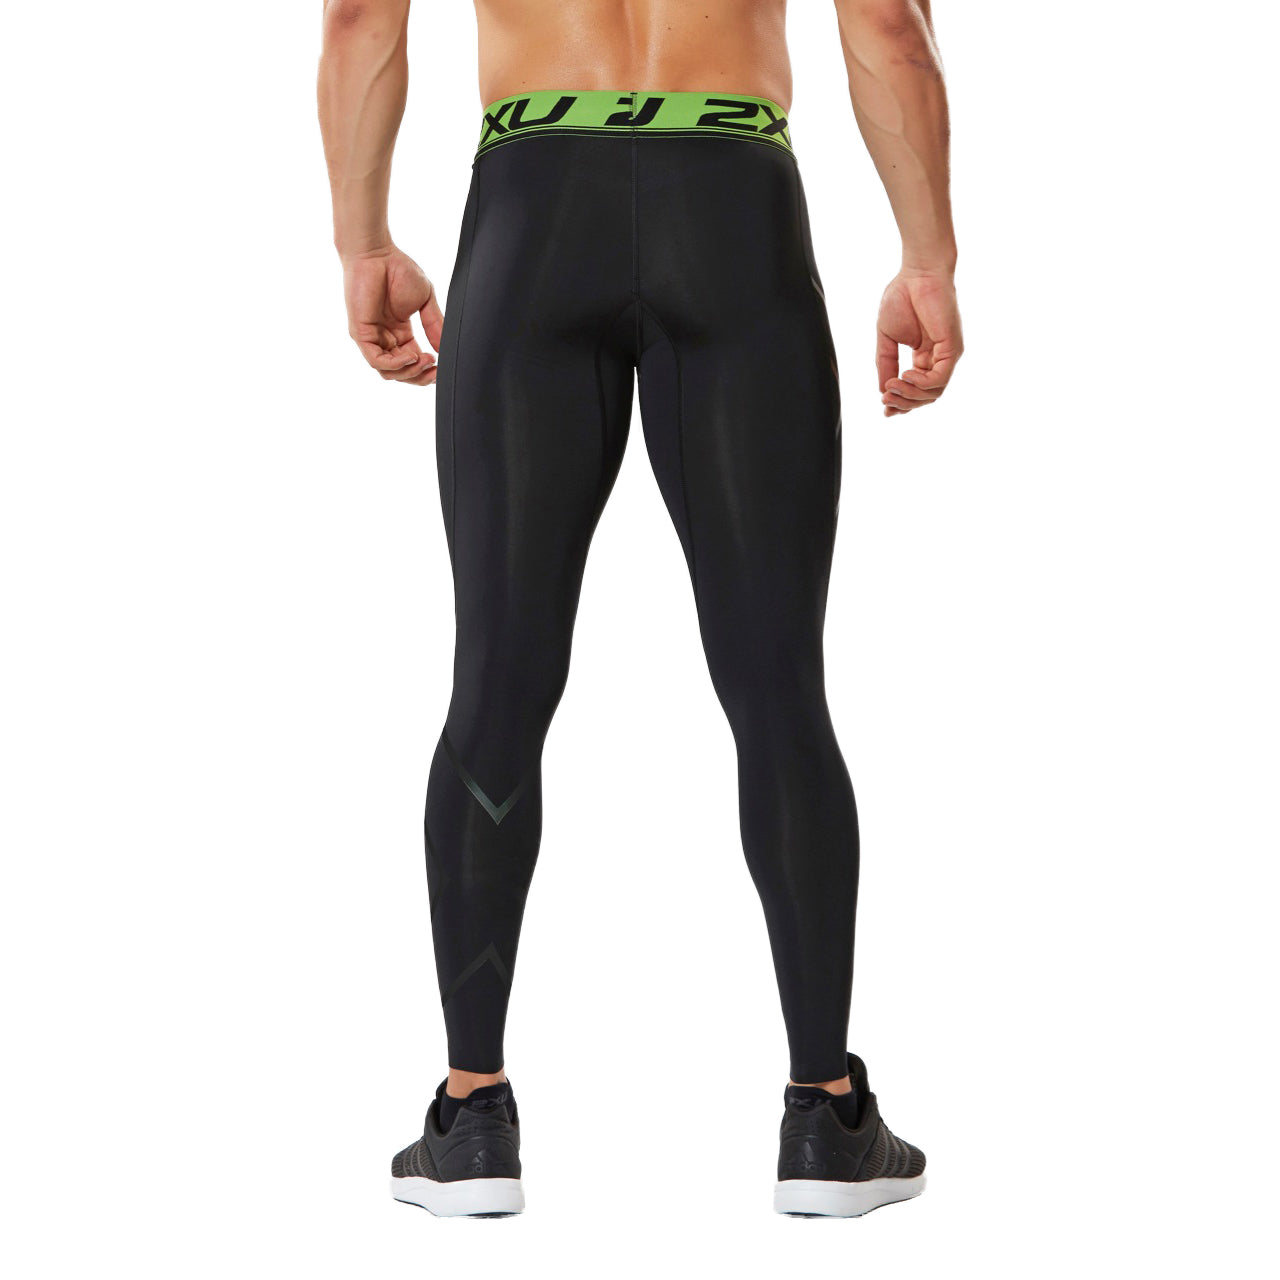 Kompressionshose lang Refresh Recovery Compression Tights